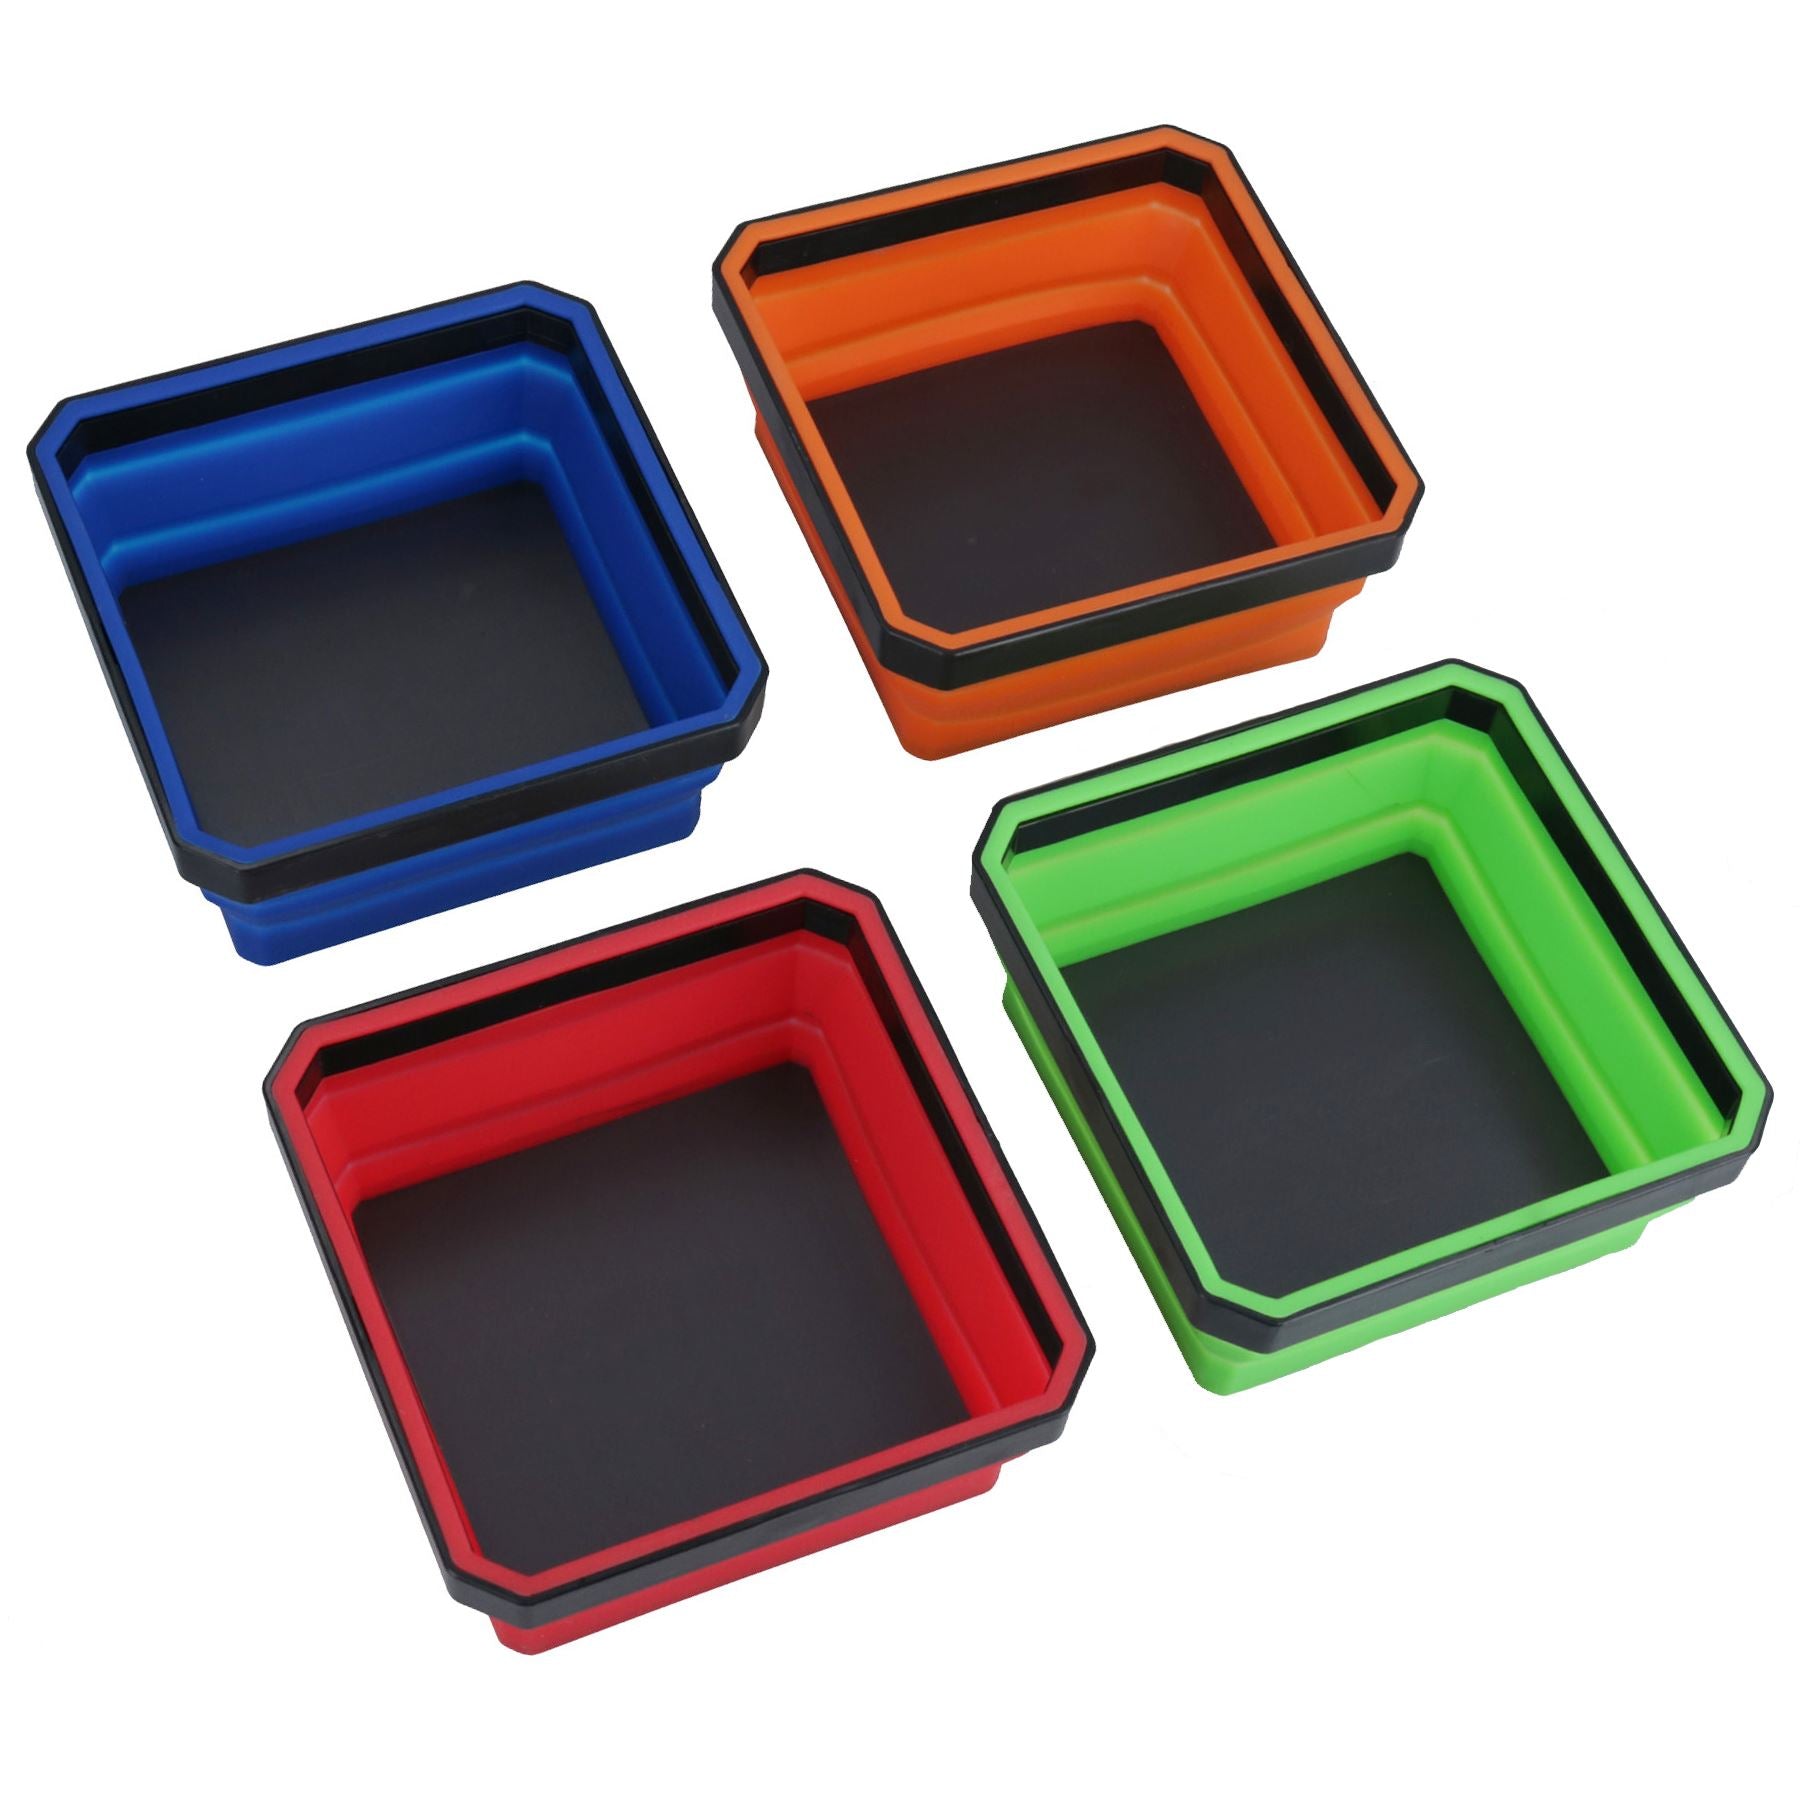 Collapsible Magnetic Parts Tray Dish Storage Bowl Holder Plastic Multicoloured